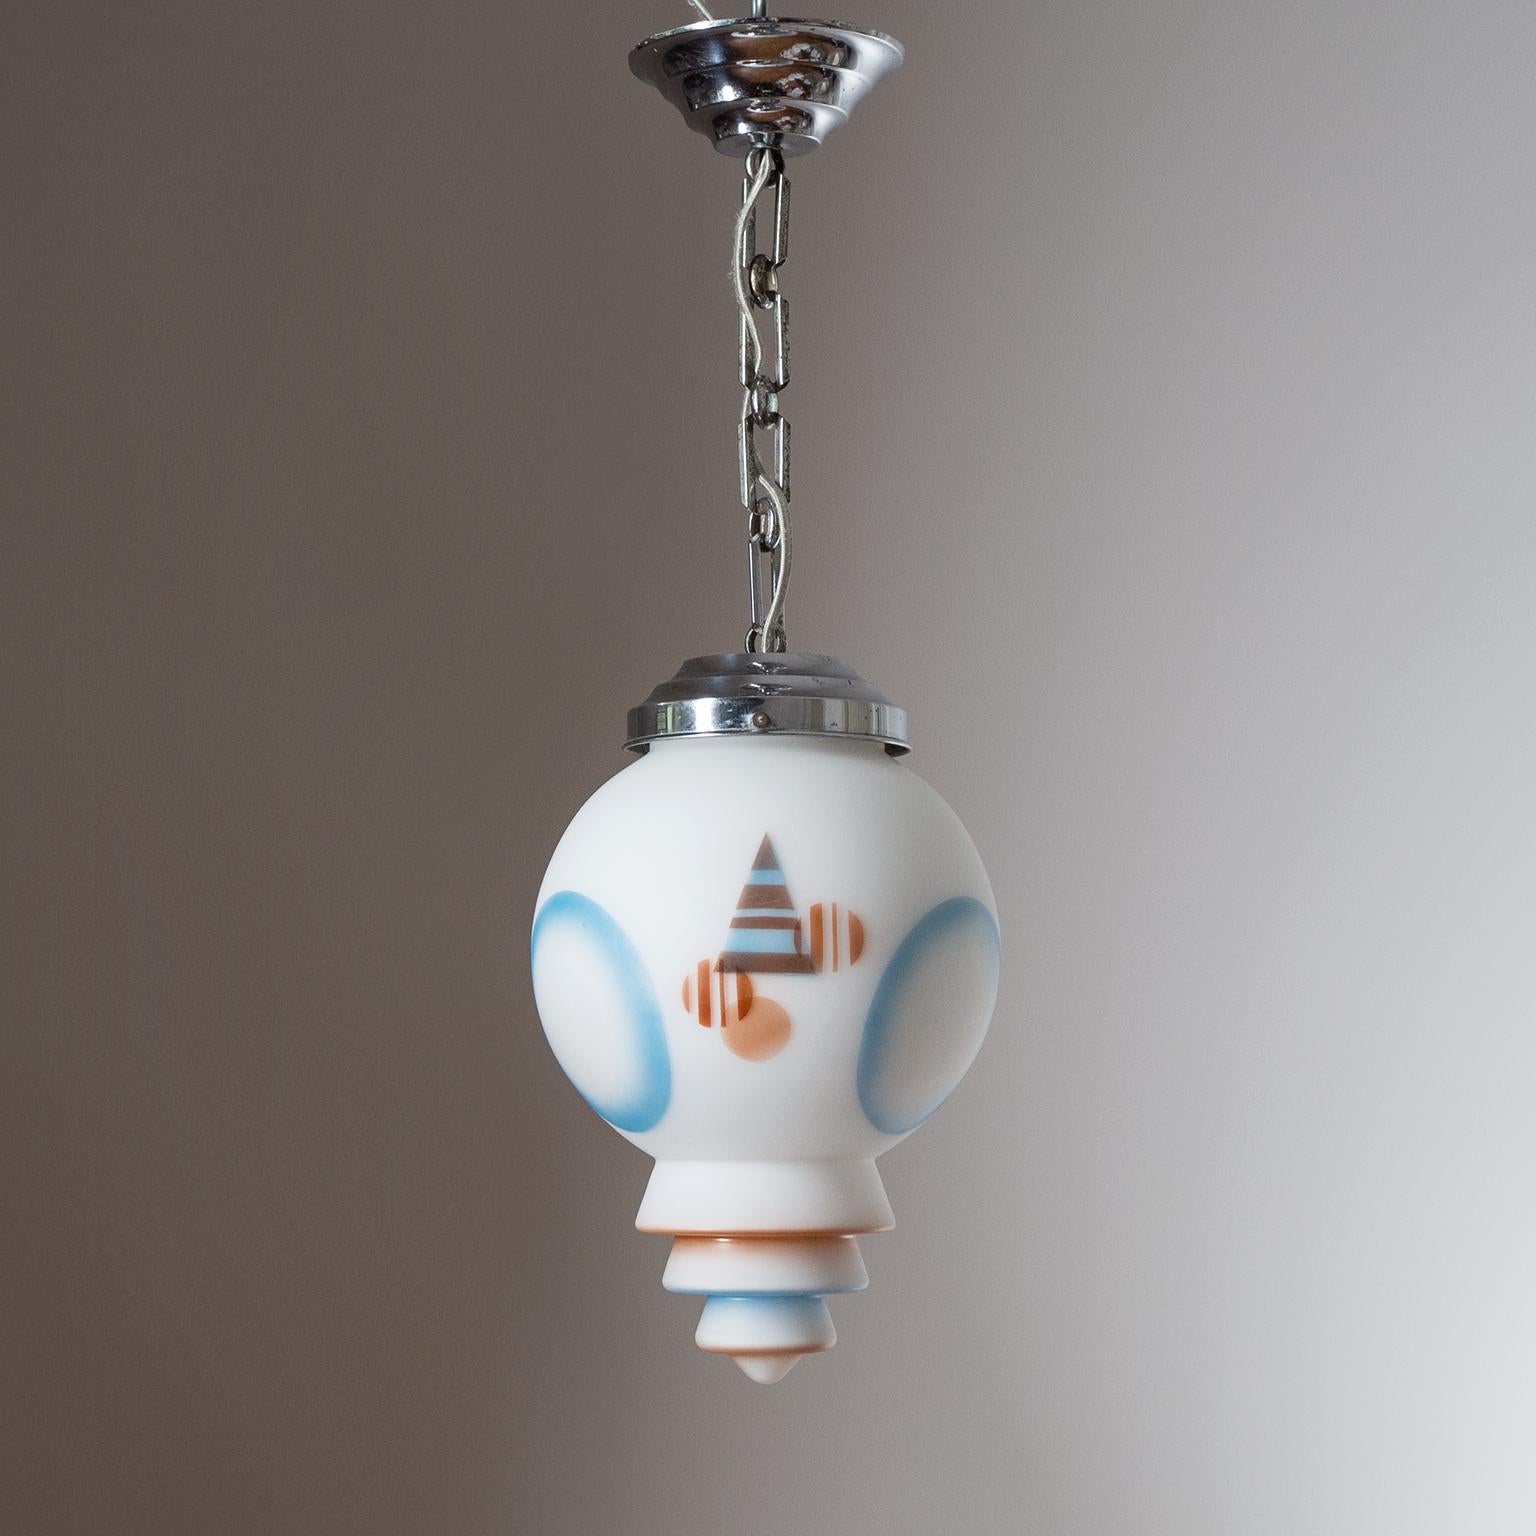 Very unique Art Deco pendant from the 1920-1930s. The 'metropolis' style tiered satin glass diffuser has enameled geometric designs in light blue and dark caramel. The hardware is chromed brass with similarly tiered canopy and glass holder. Fine